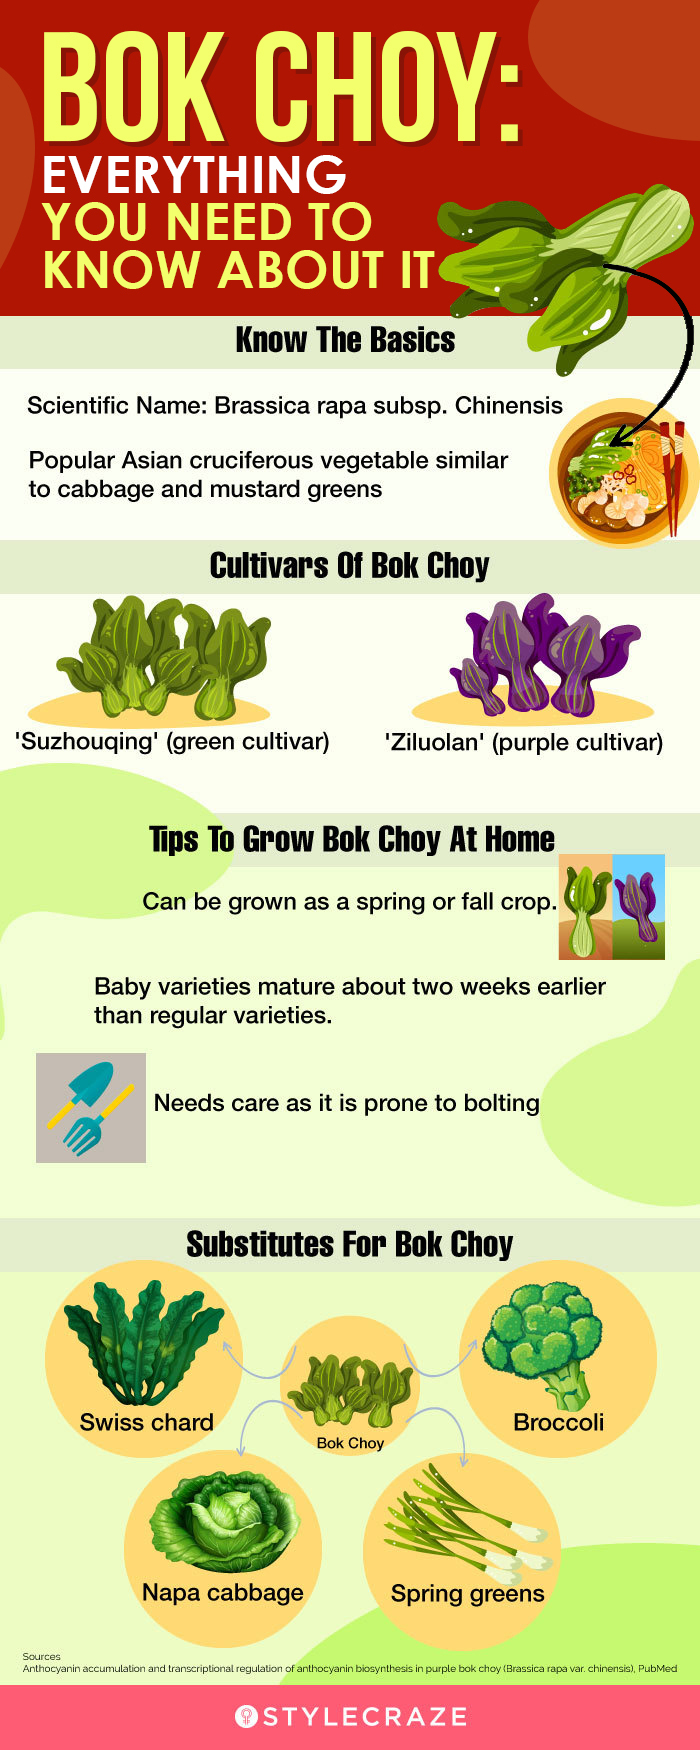 bok choy everything you need to know about it (infographic)